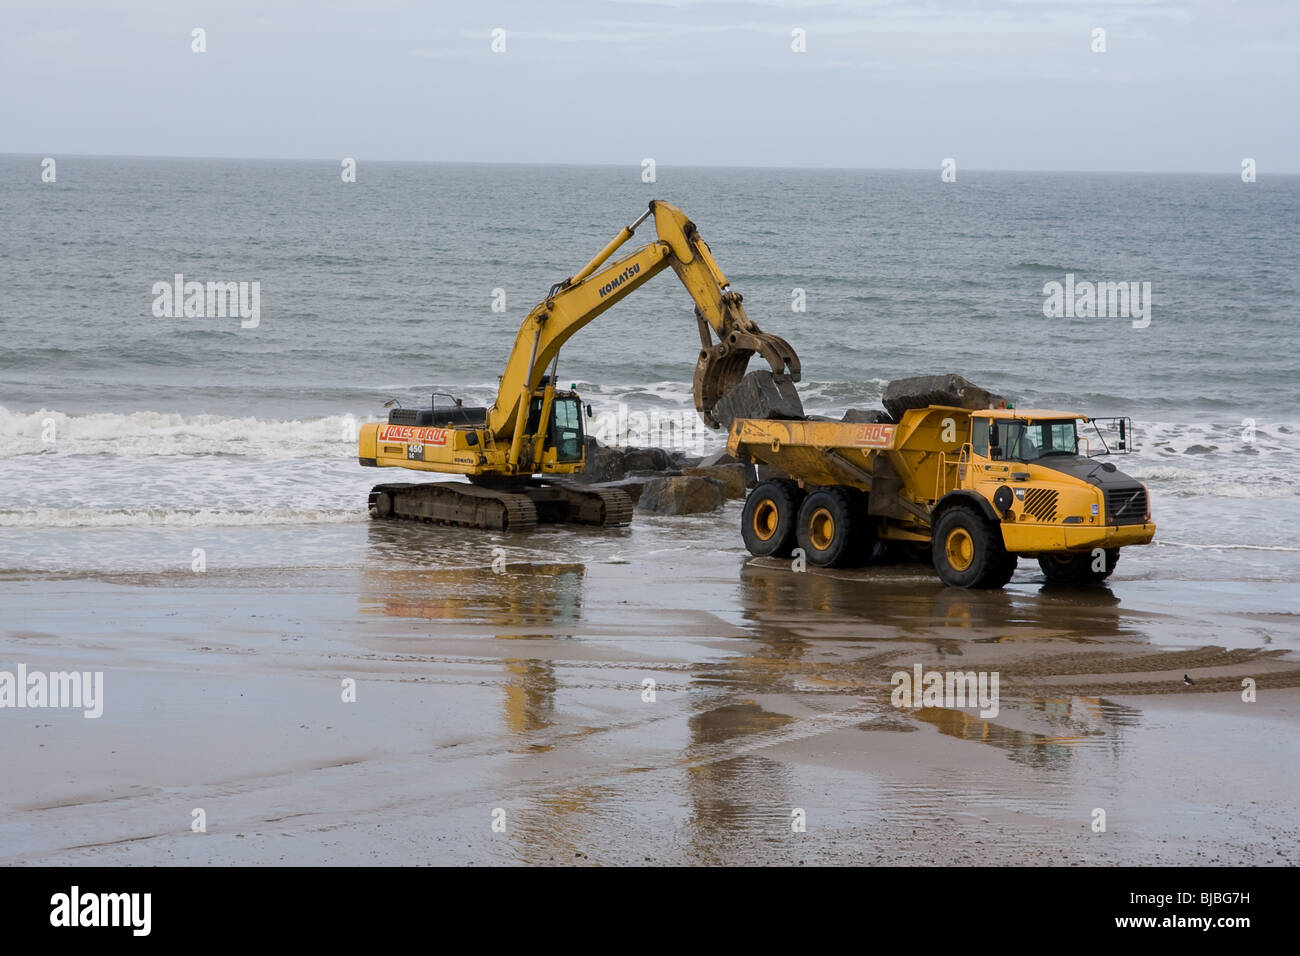 Moving boulders on the beach, tywyn Stock Photo